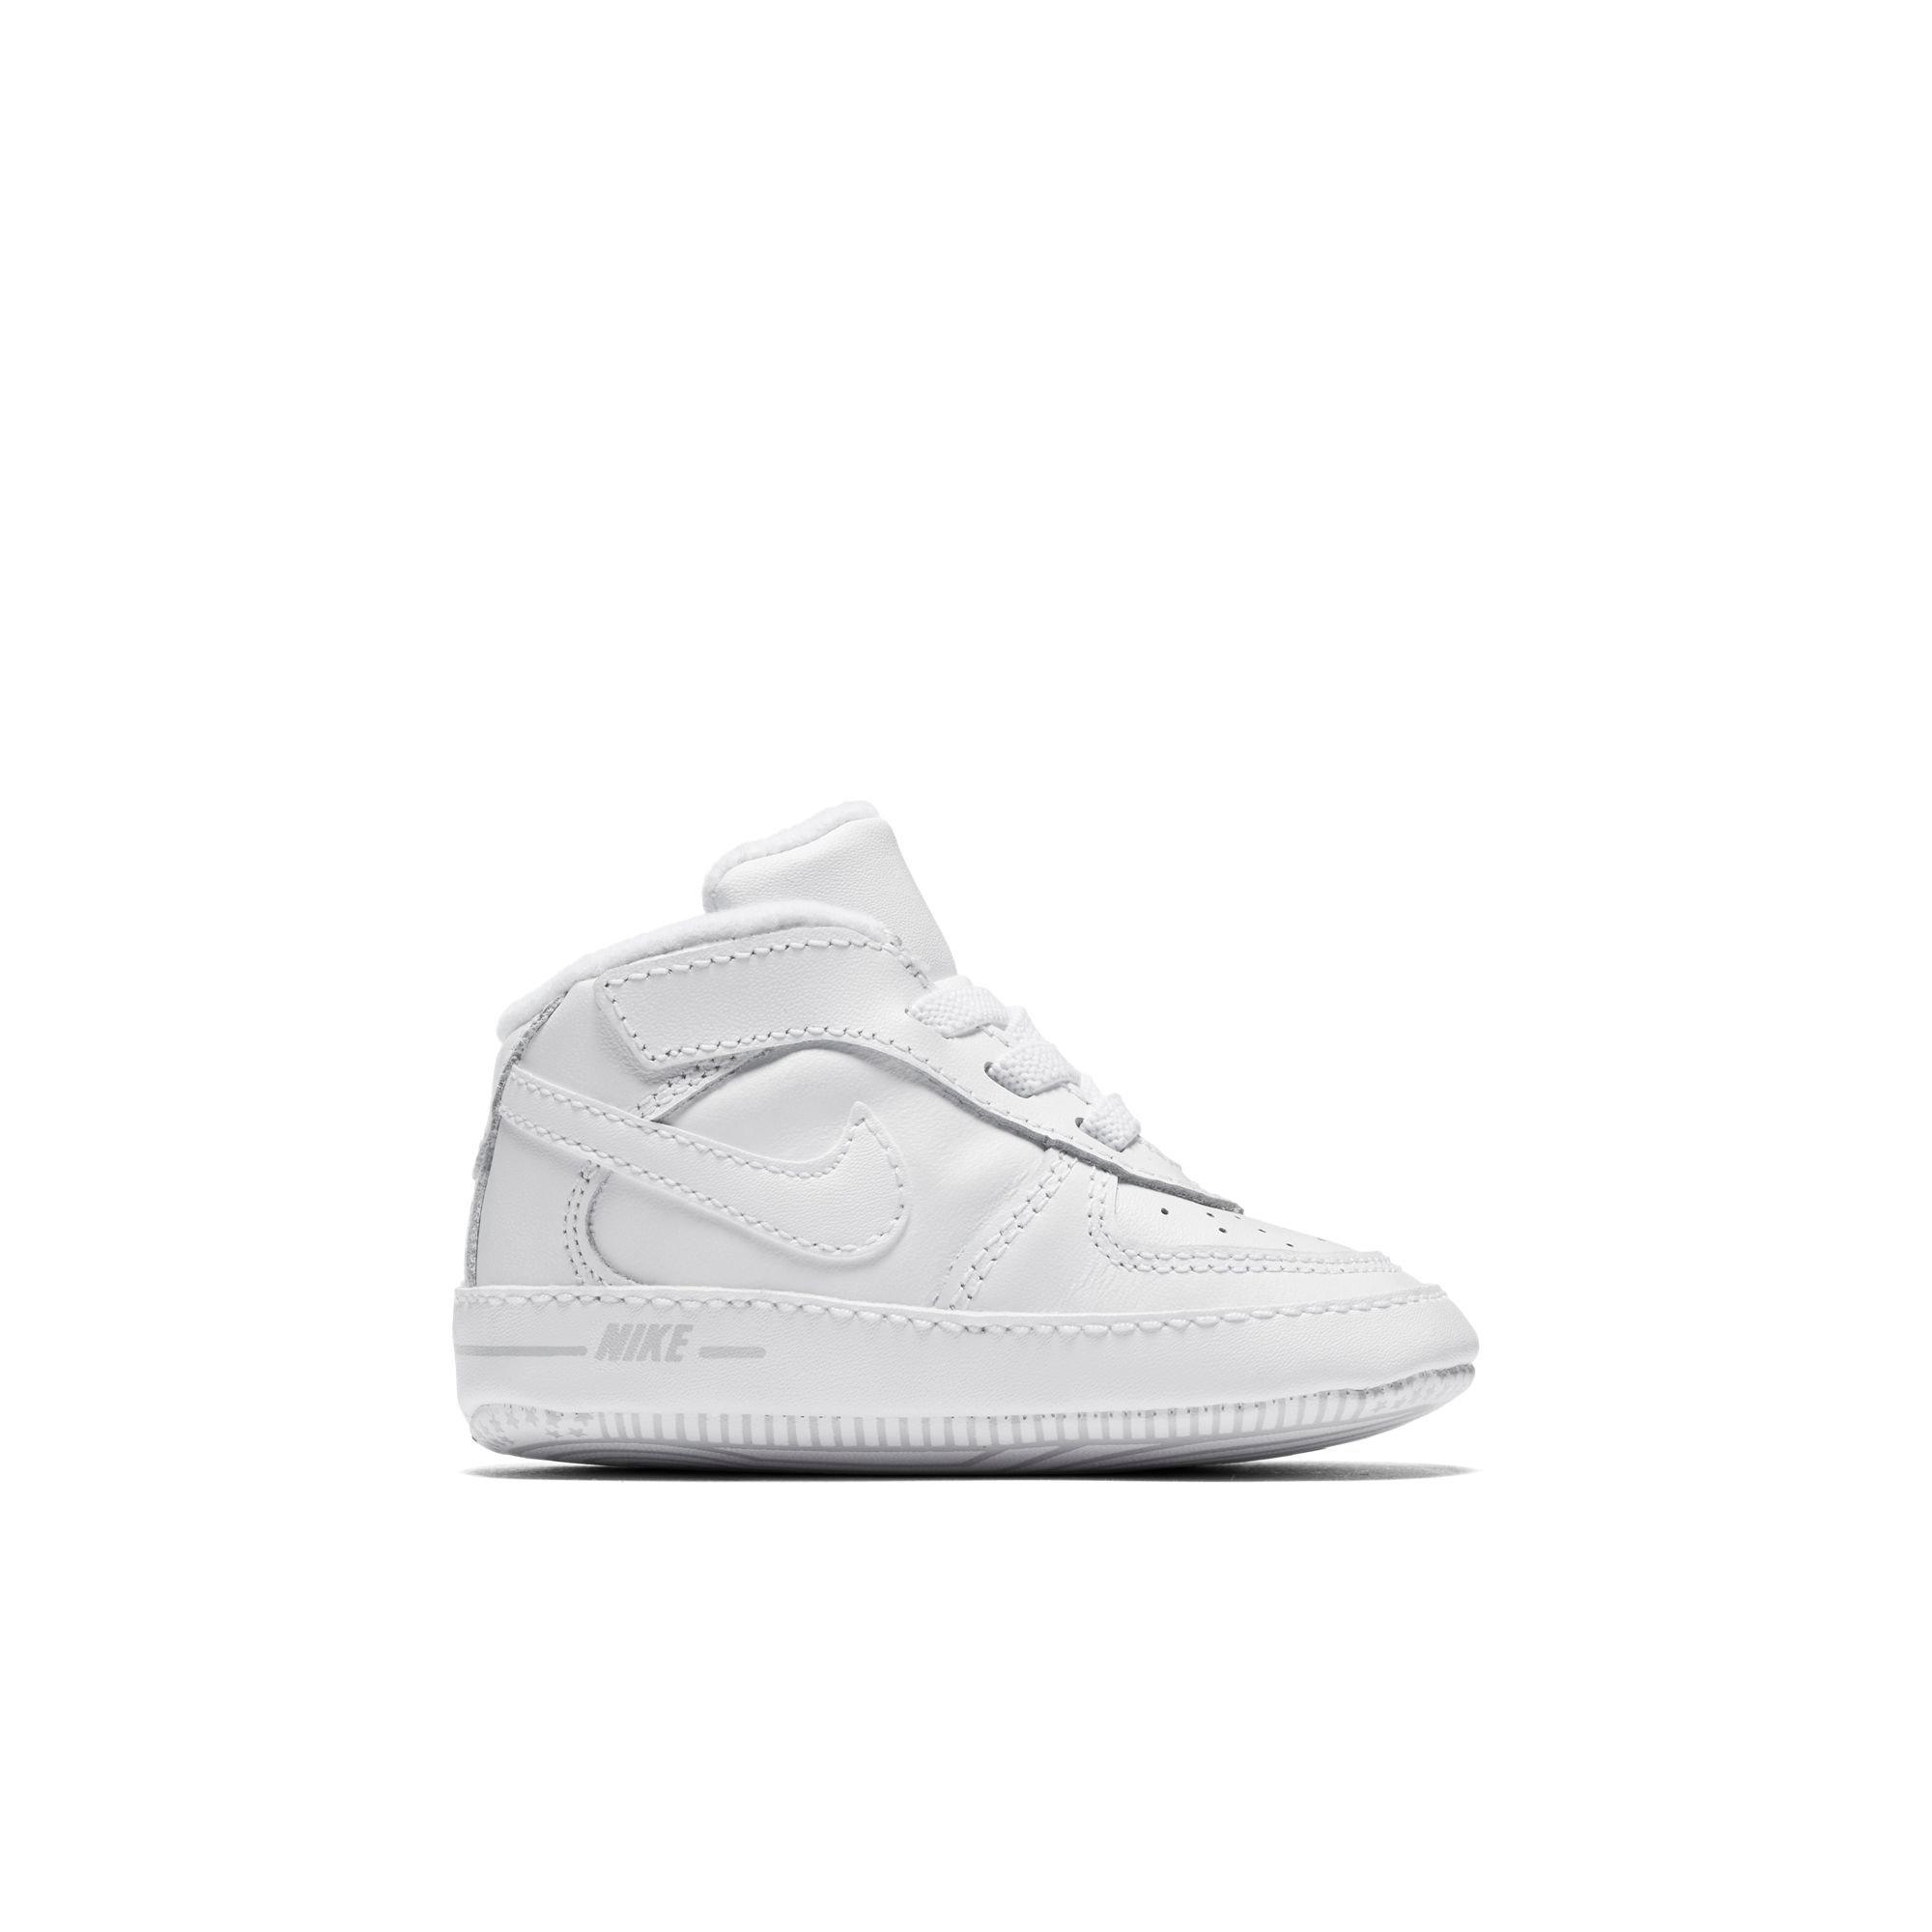 nike air force 1 size 3c